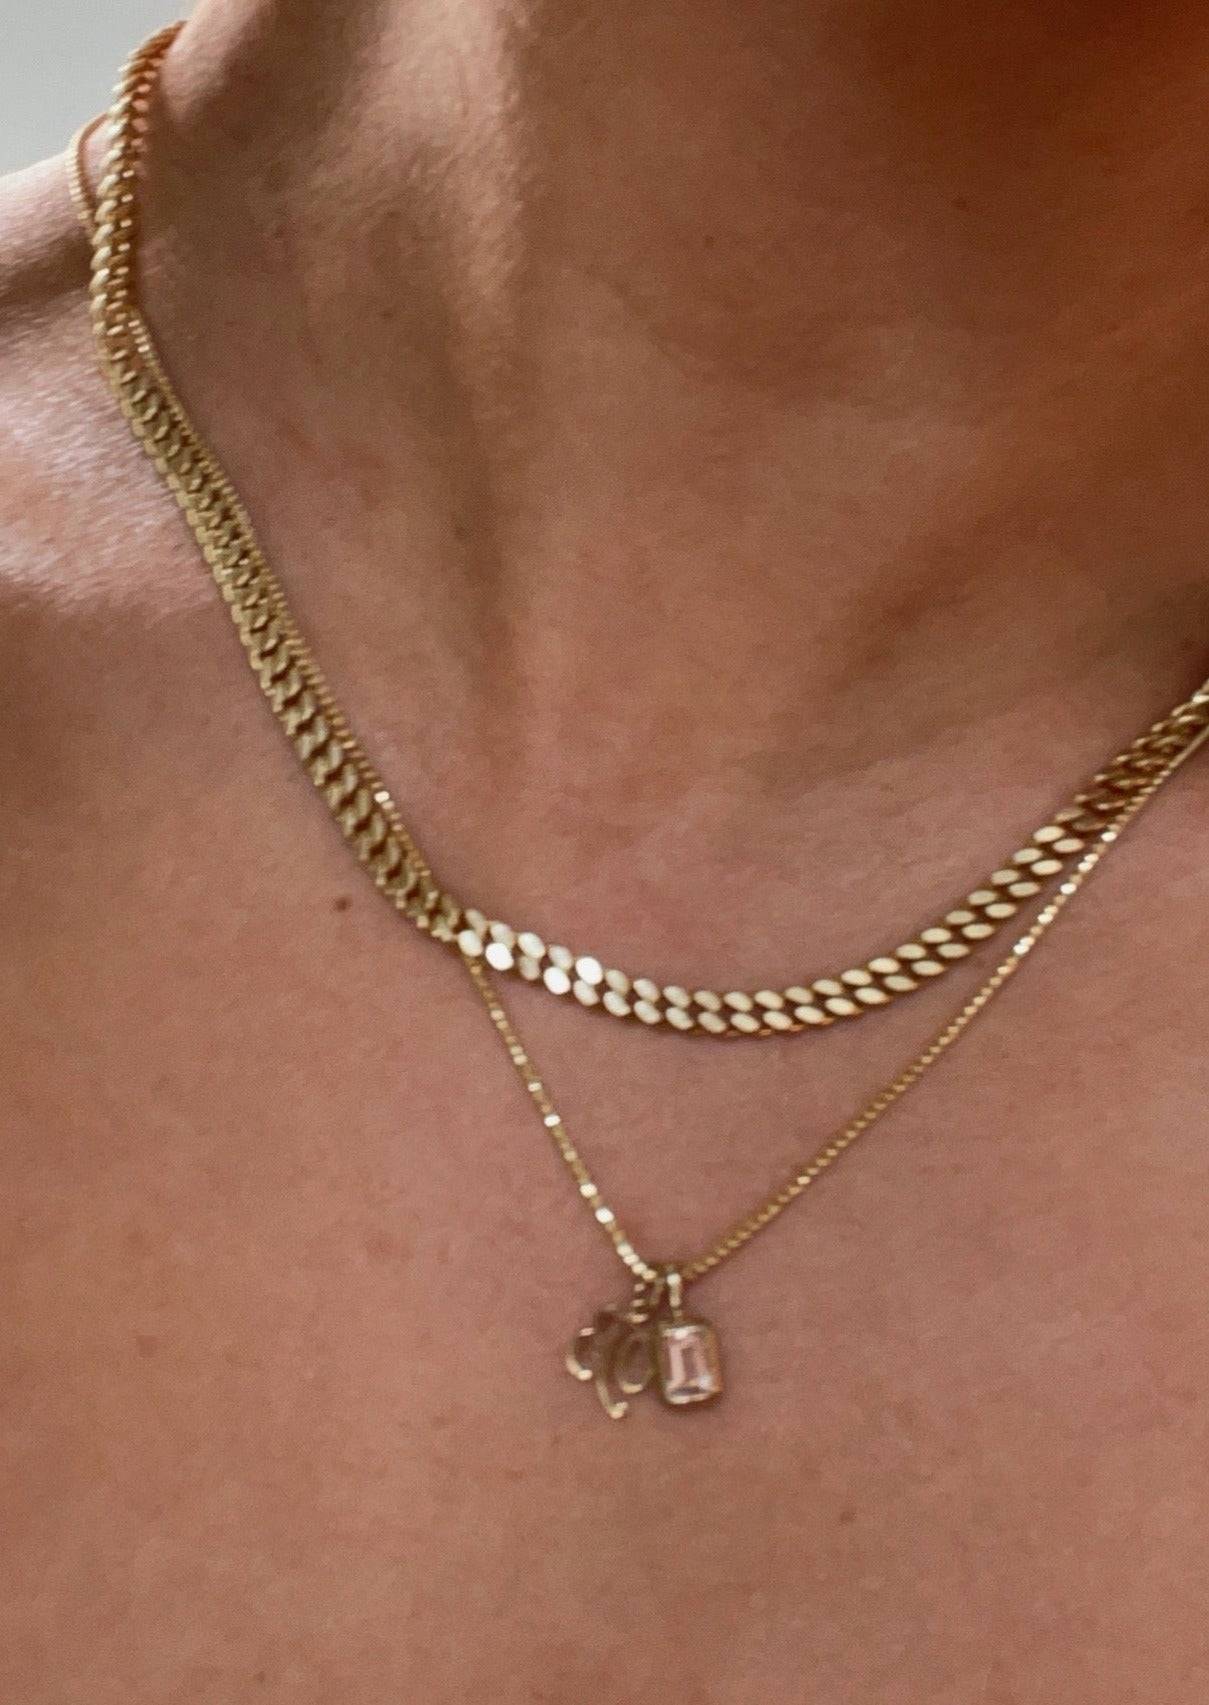 alt="Capri Curb Chain Necklace II styled with box chain and pendants"